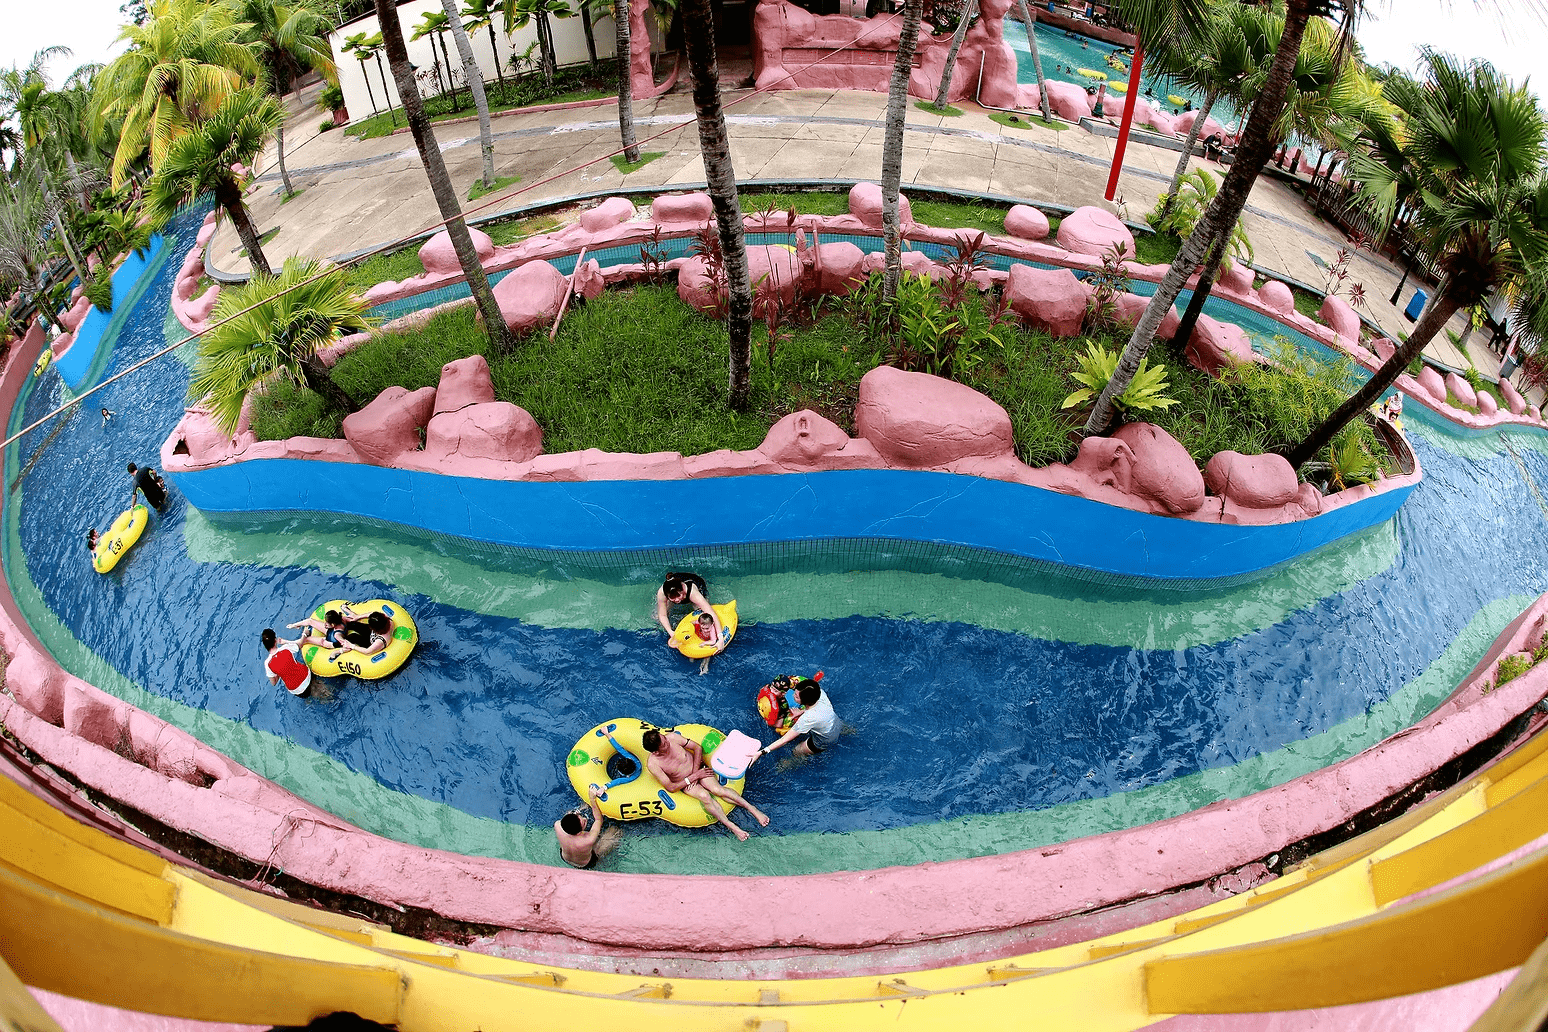 theme parks in malaysia - A’Famosa Water Theme Park lazy river